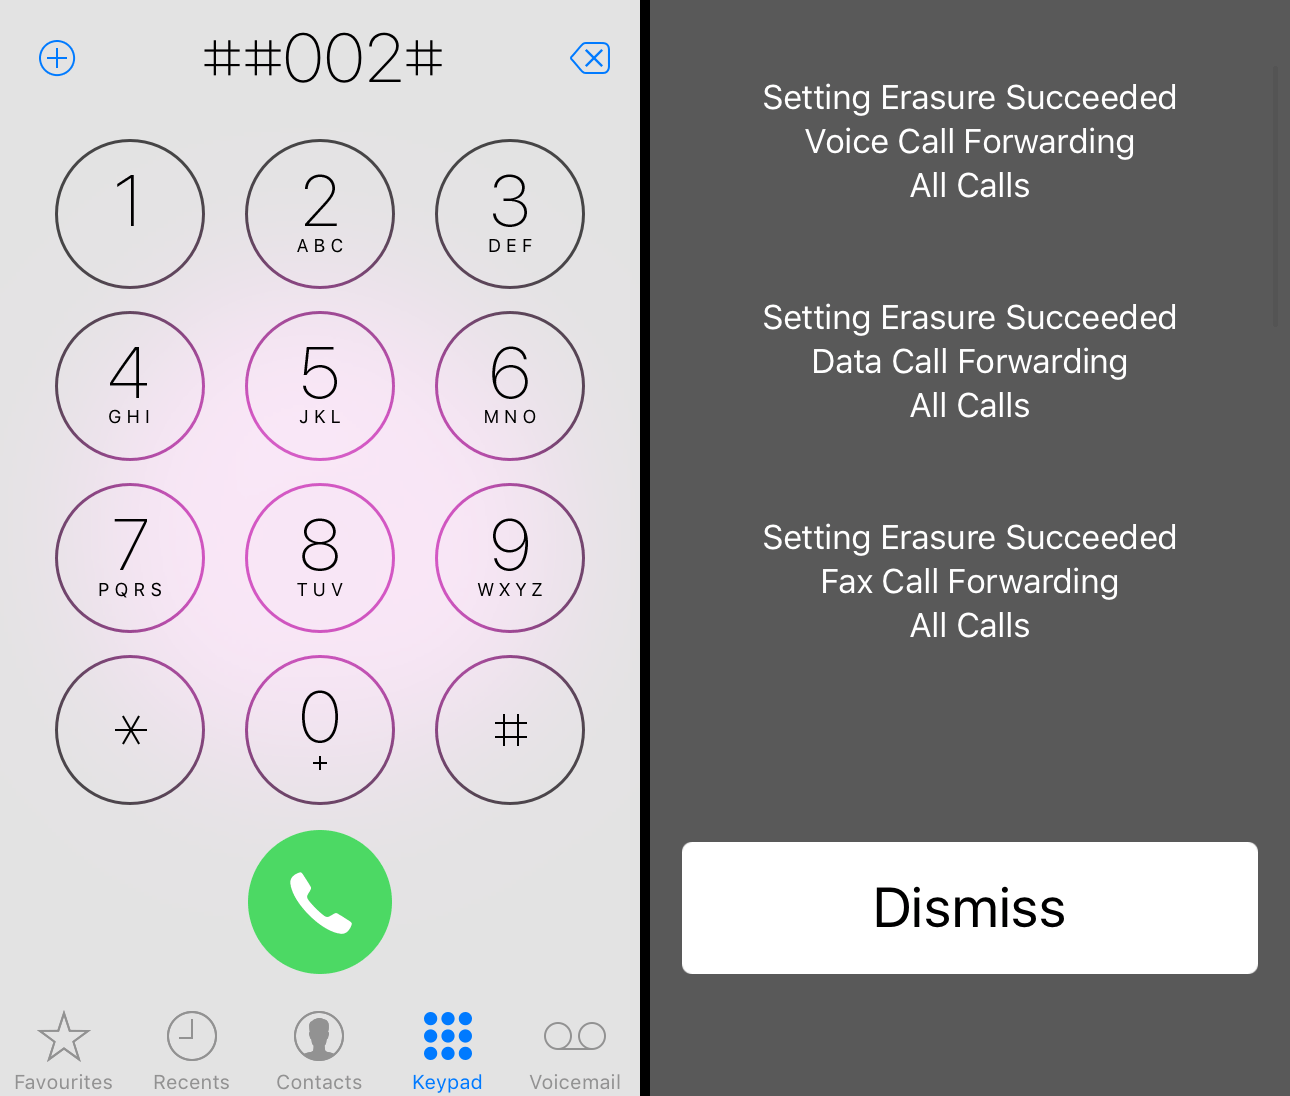 How to Turn Off Voice Mail on Your iPhone